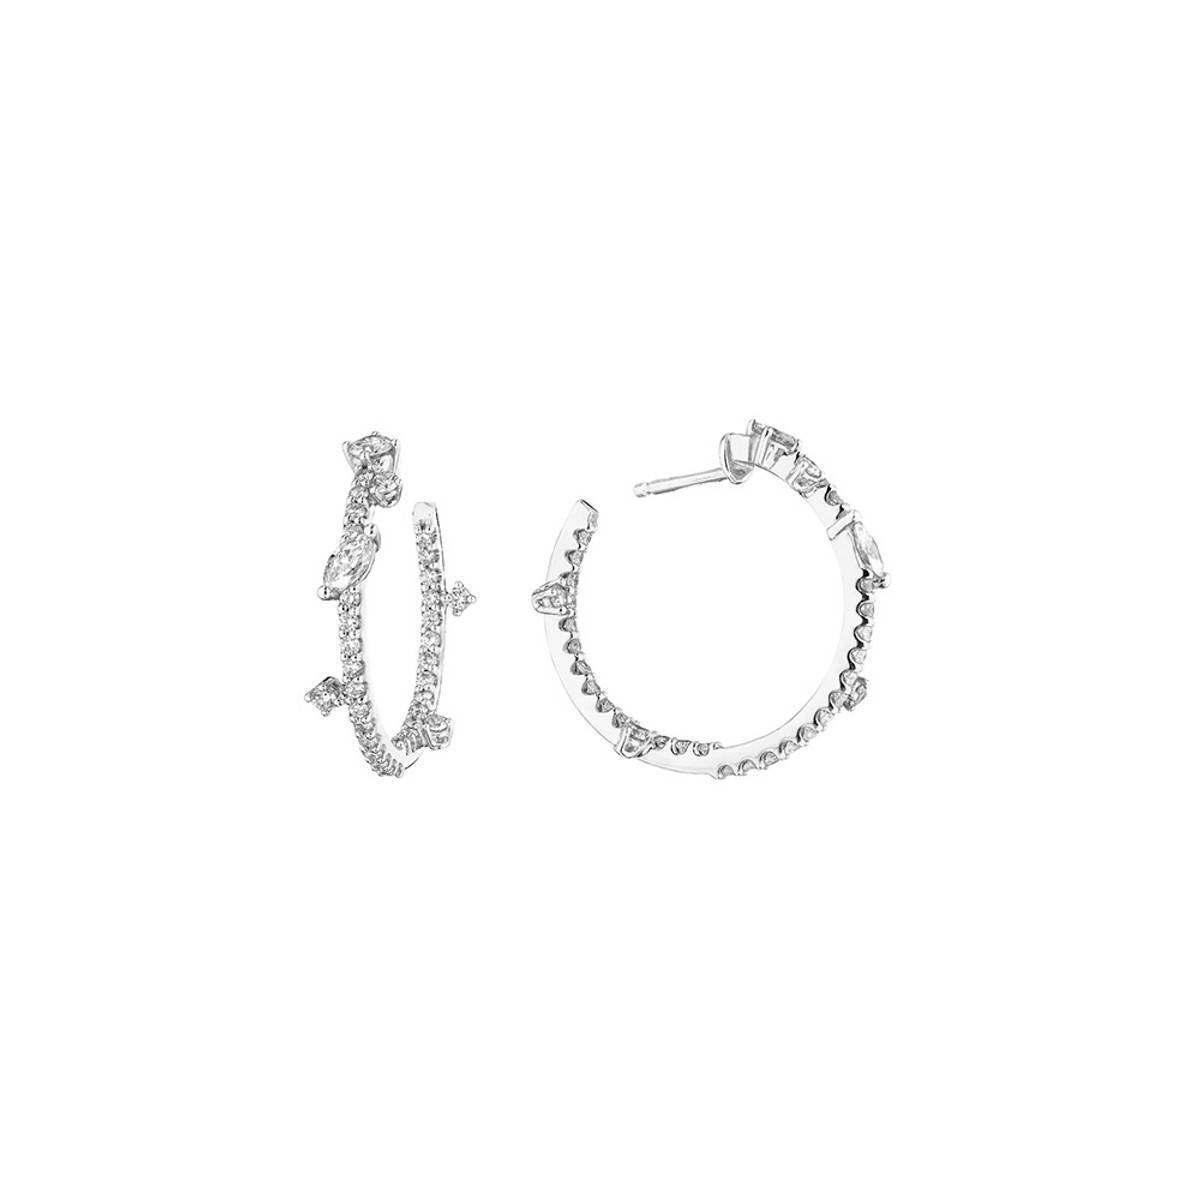 Penny Preville 18K White Gold Constellation Hoop Earrings-32981 Product Image